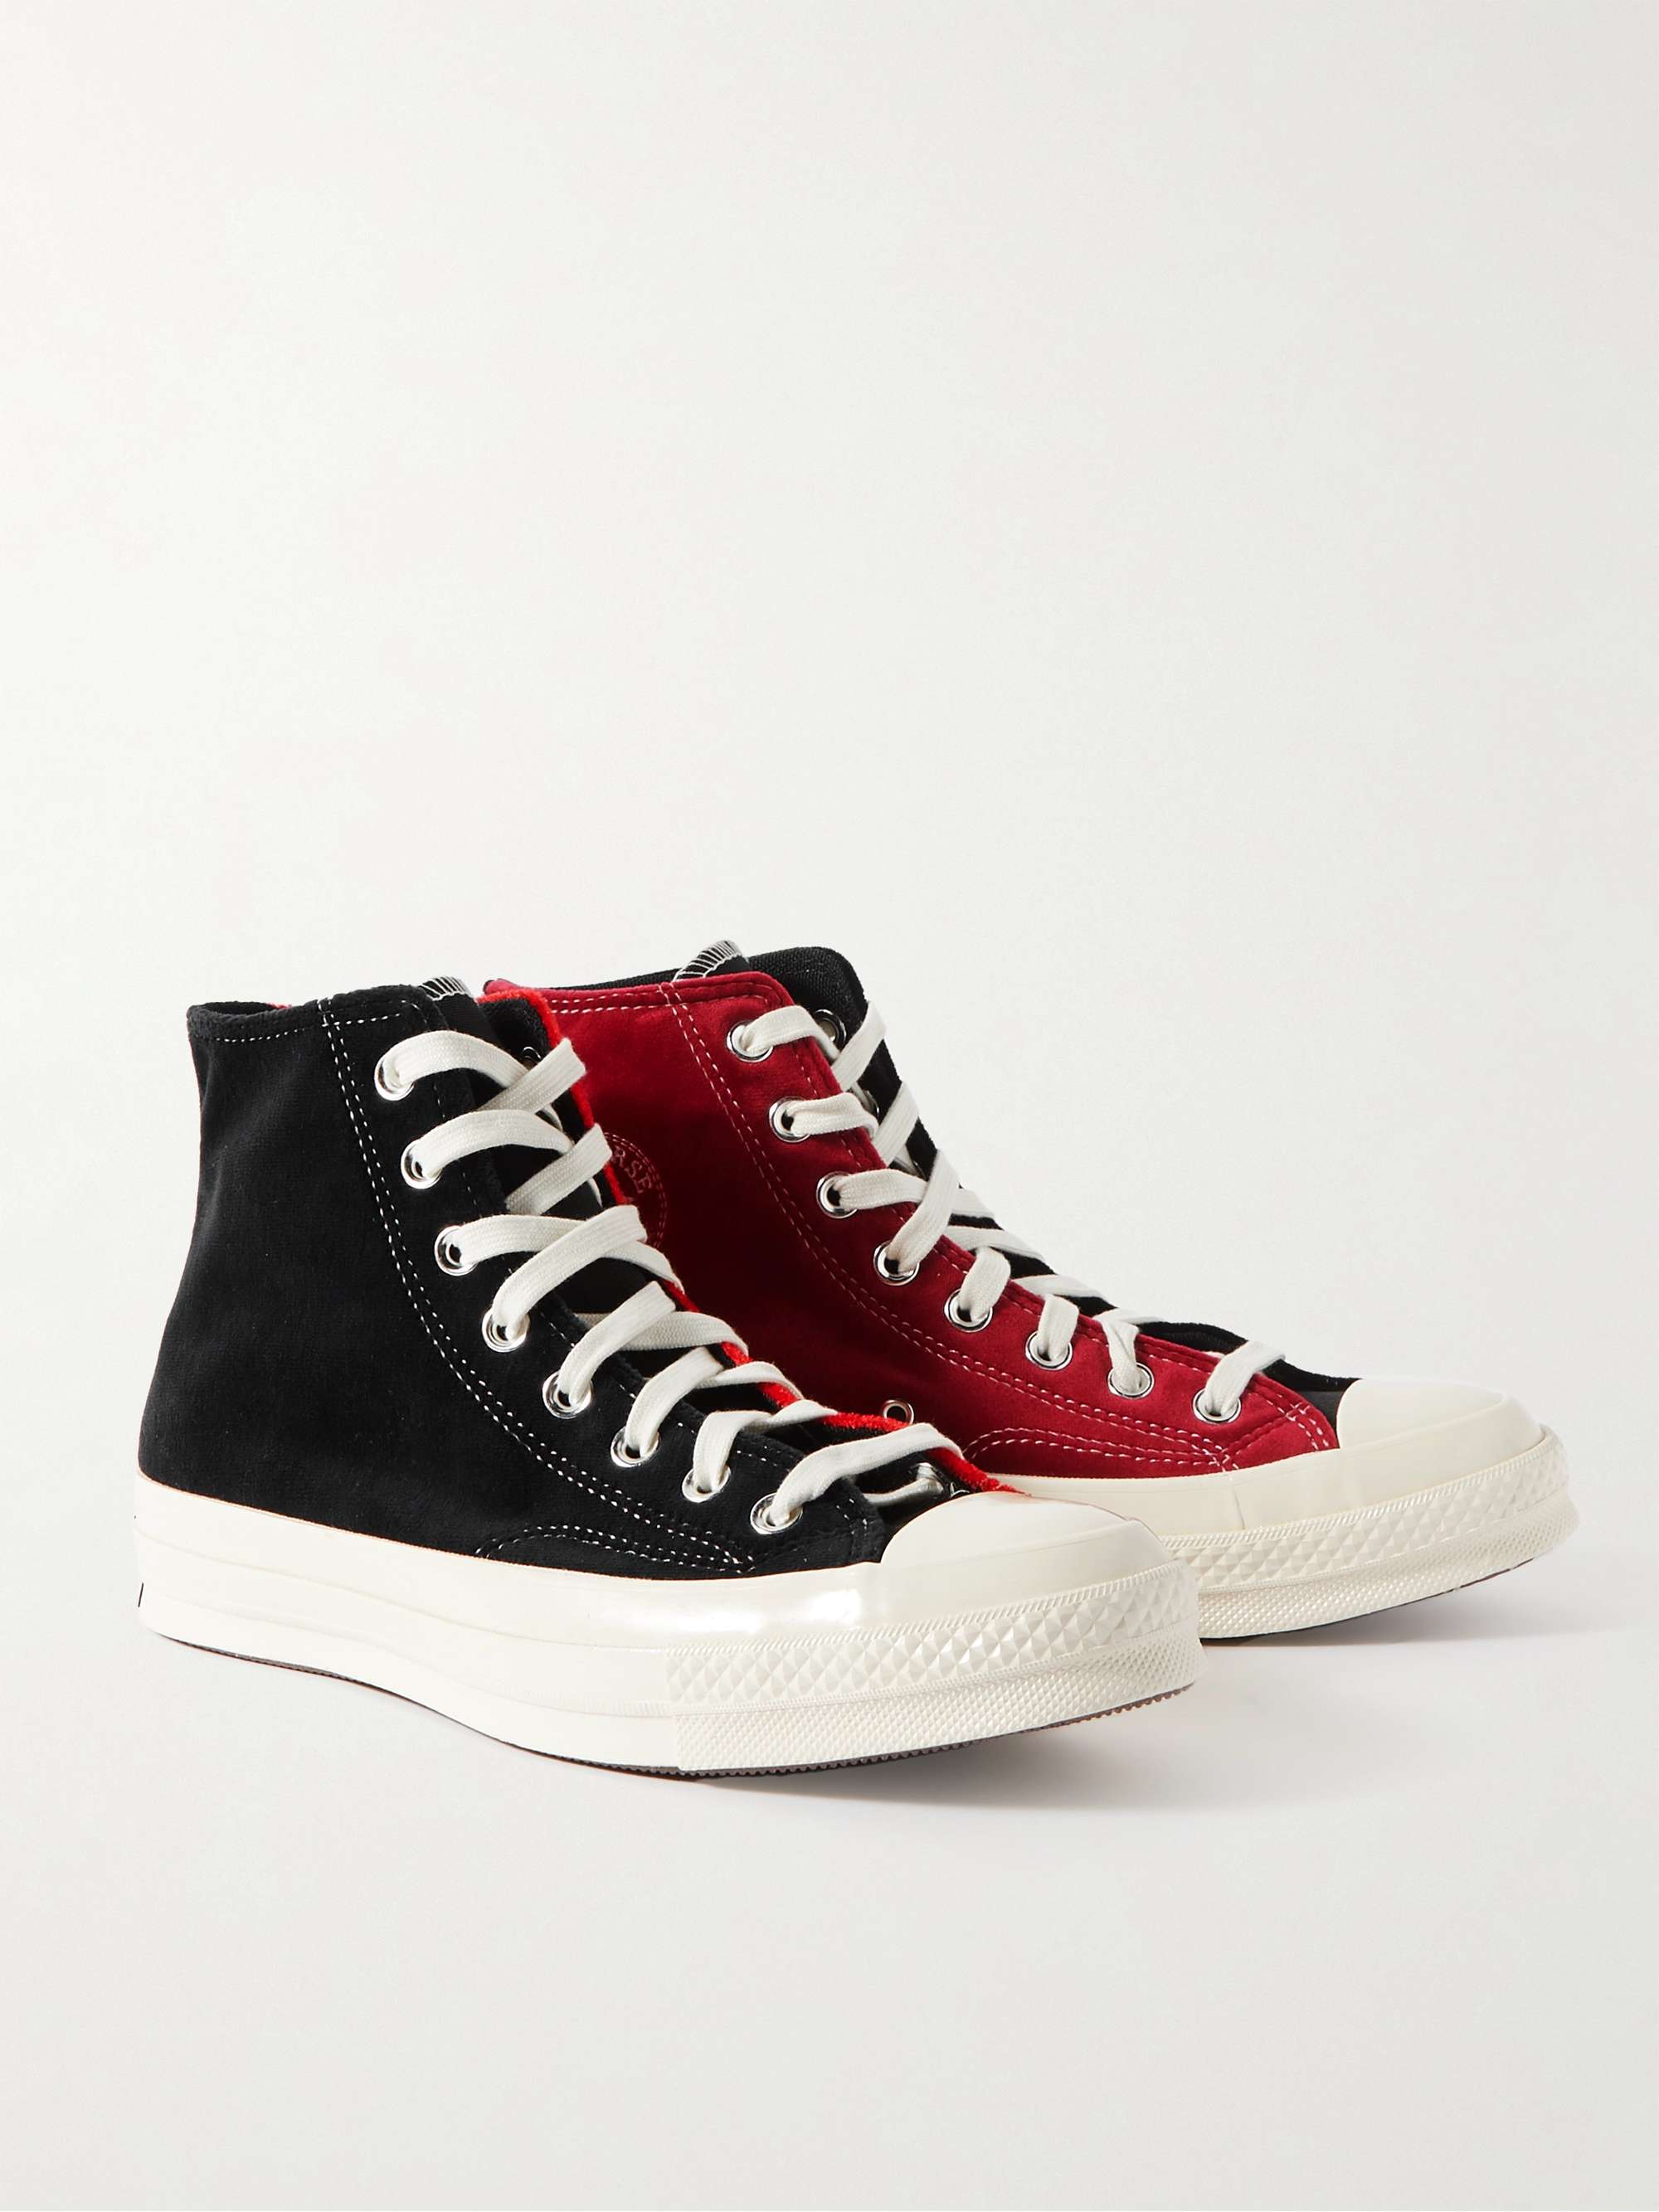 CONVERSE + Beyond Retro Chuck 70 Upcycled Two-Tone Velvet High-Top Sneakers